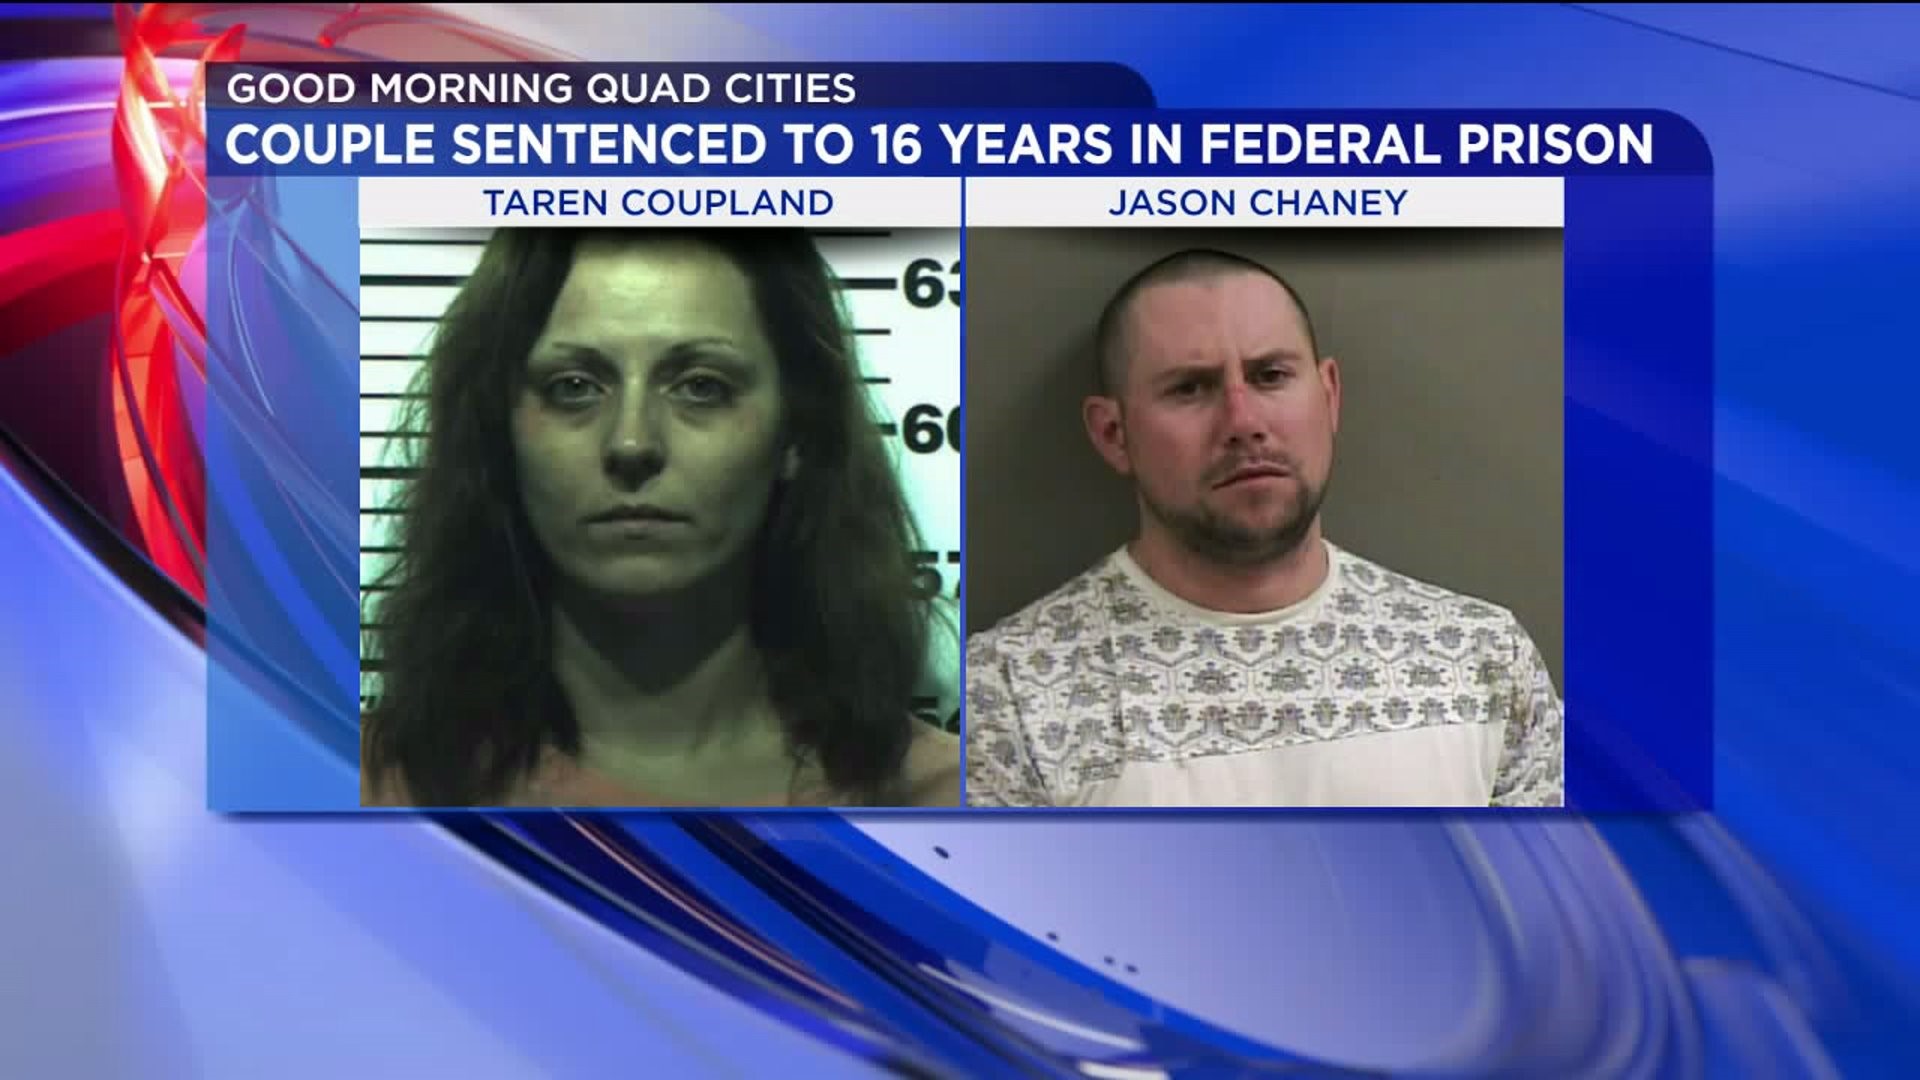 Couple Sentenced to 16 Years in Federal Prison